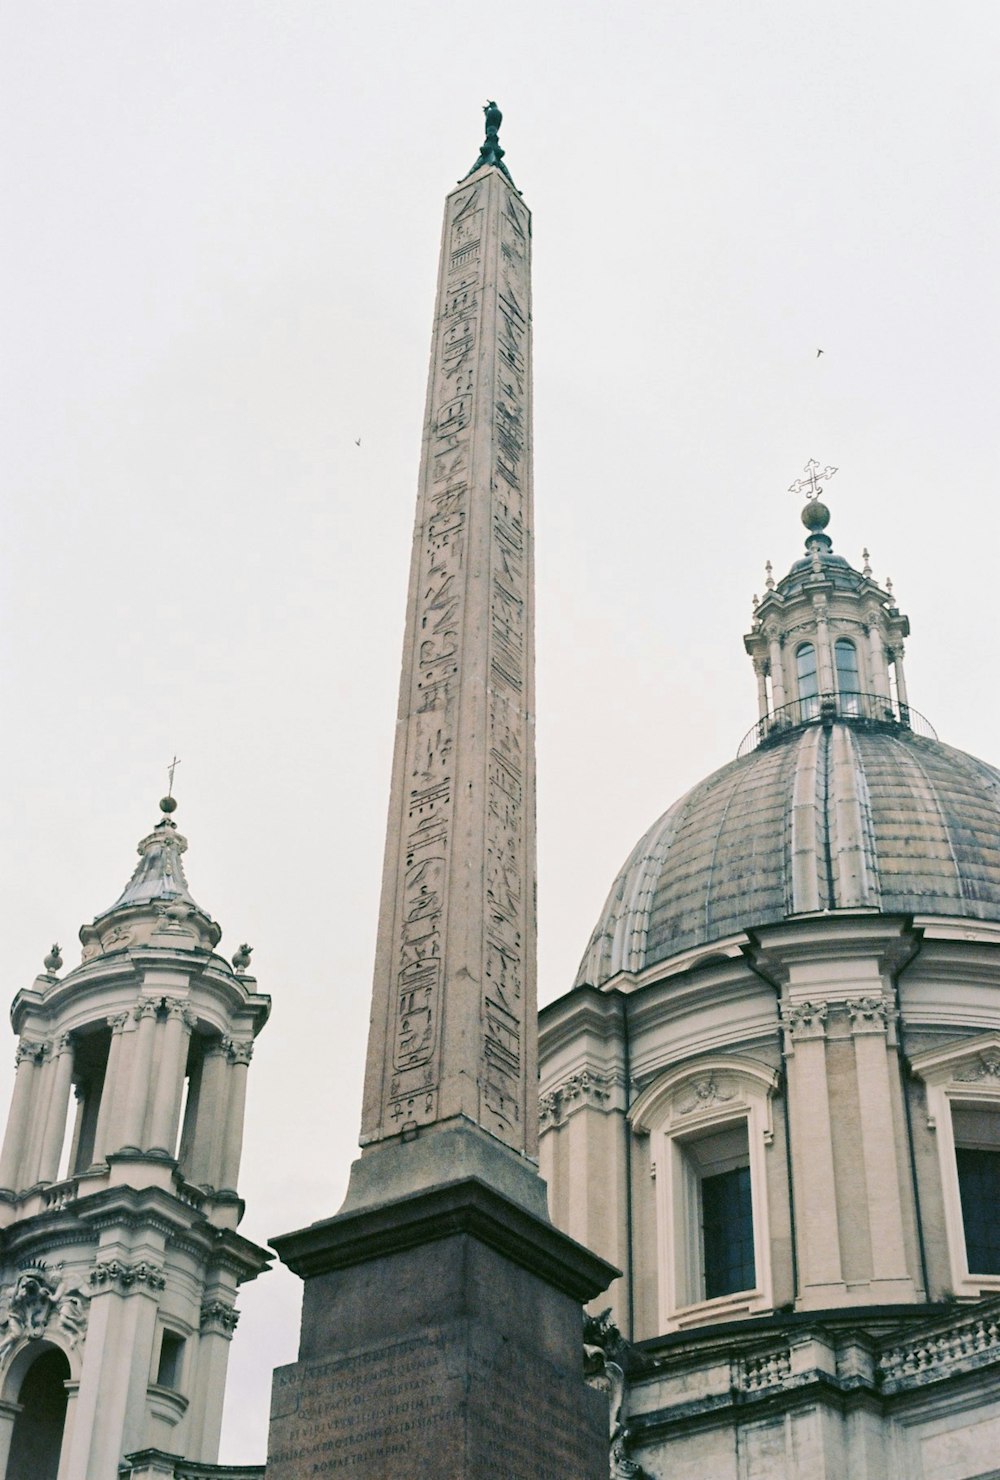 a tall obelisk in front of a building